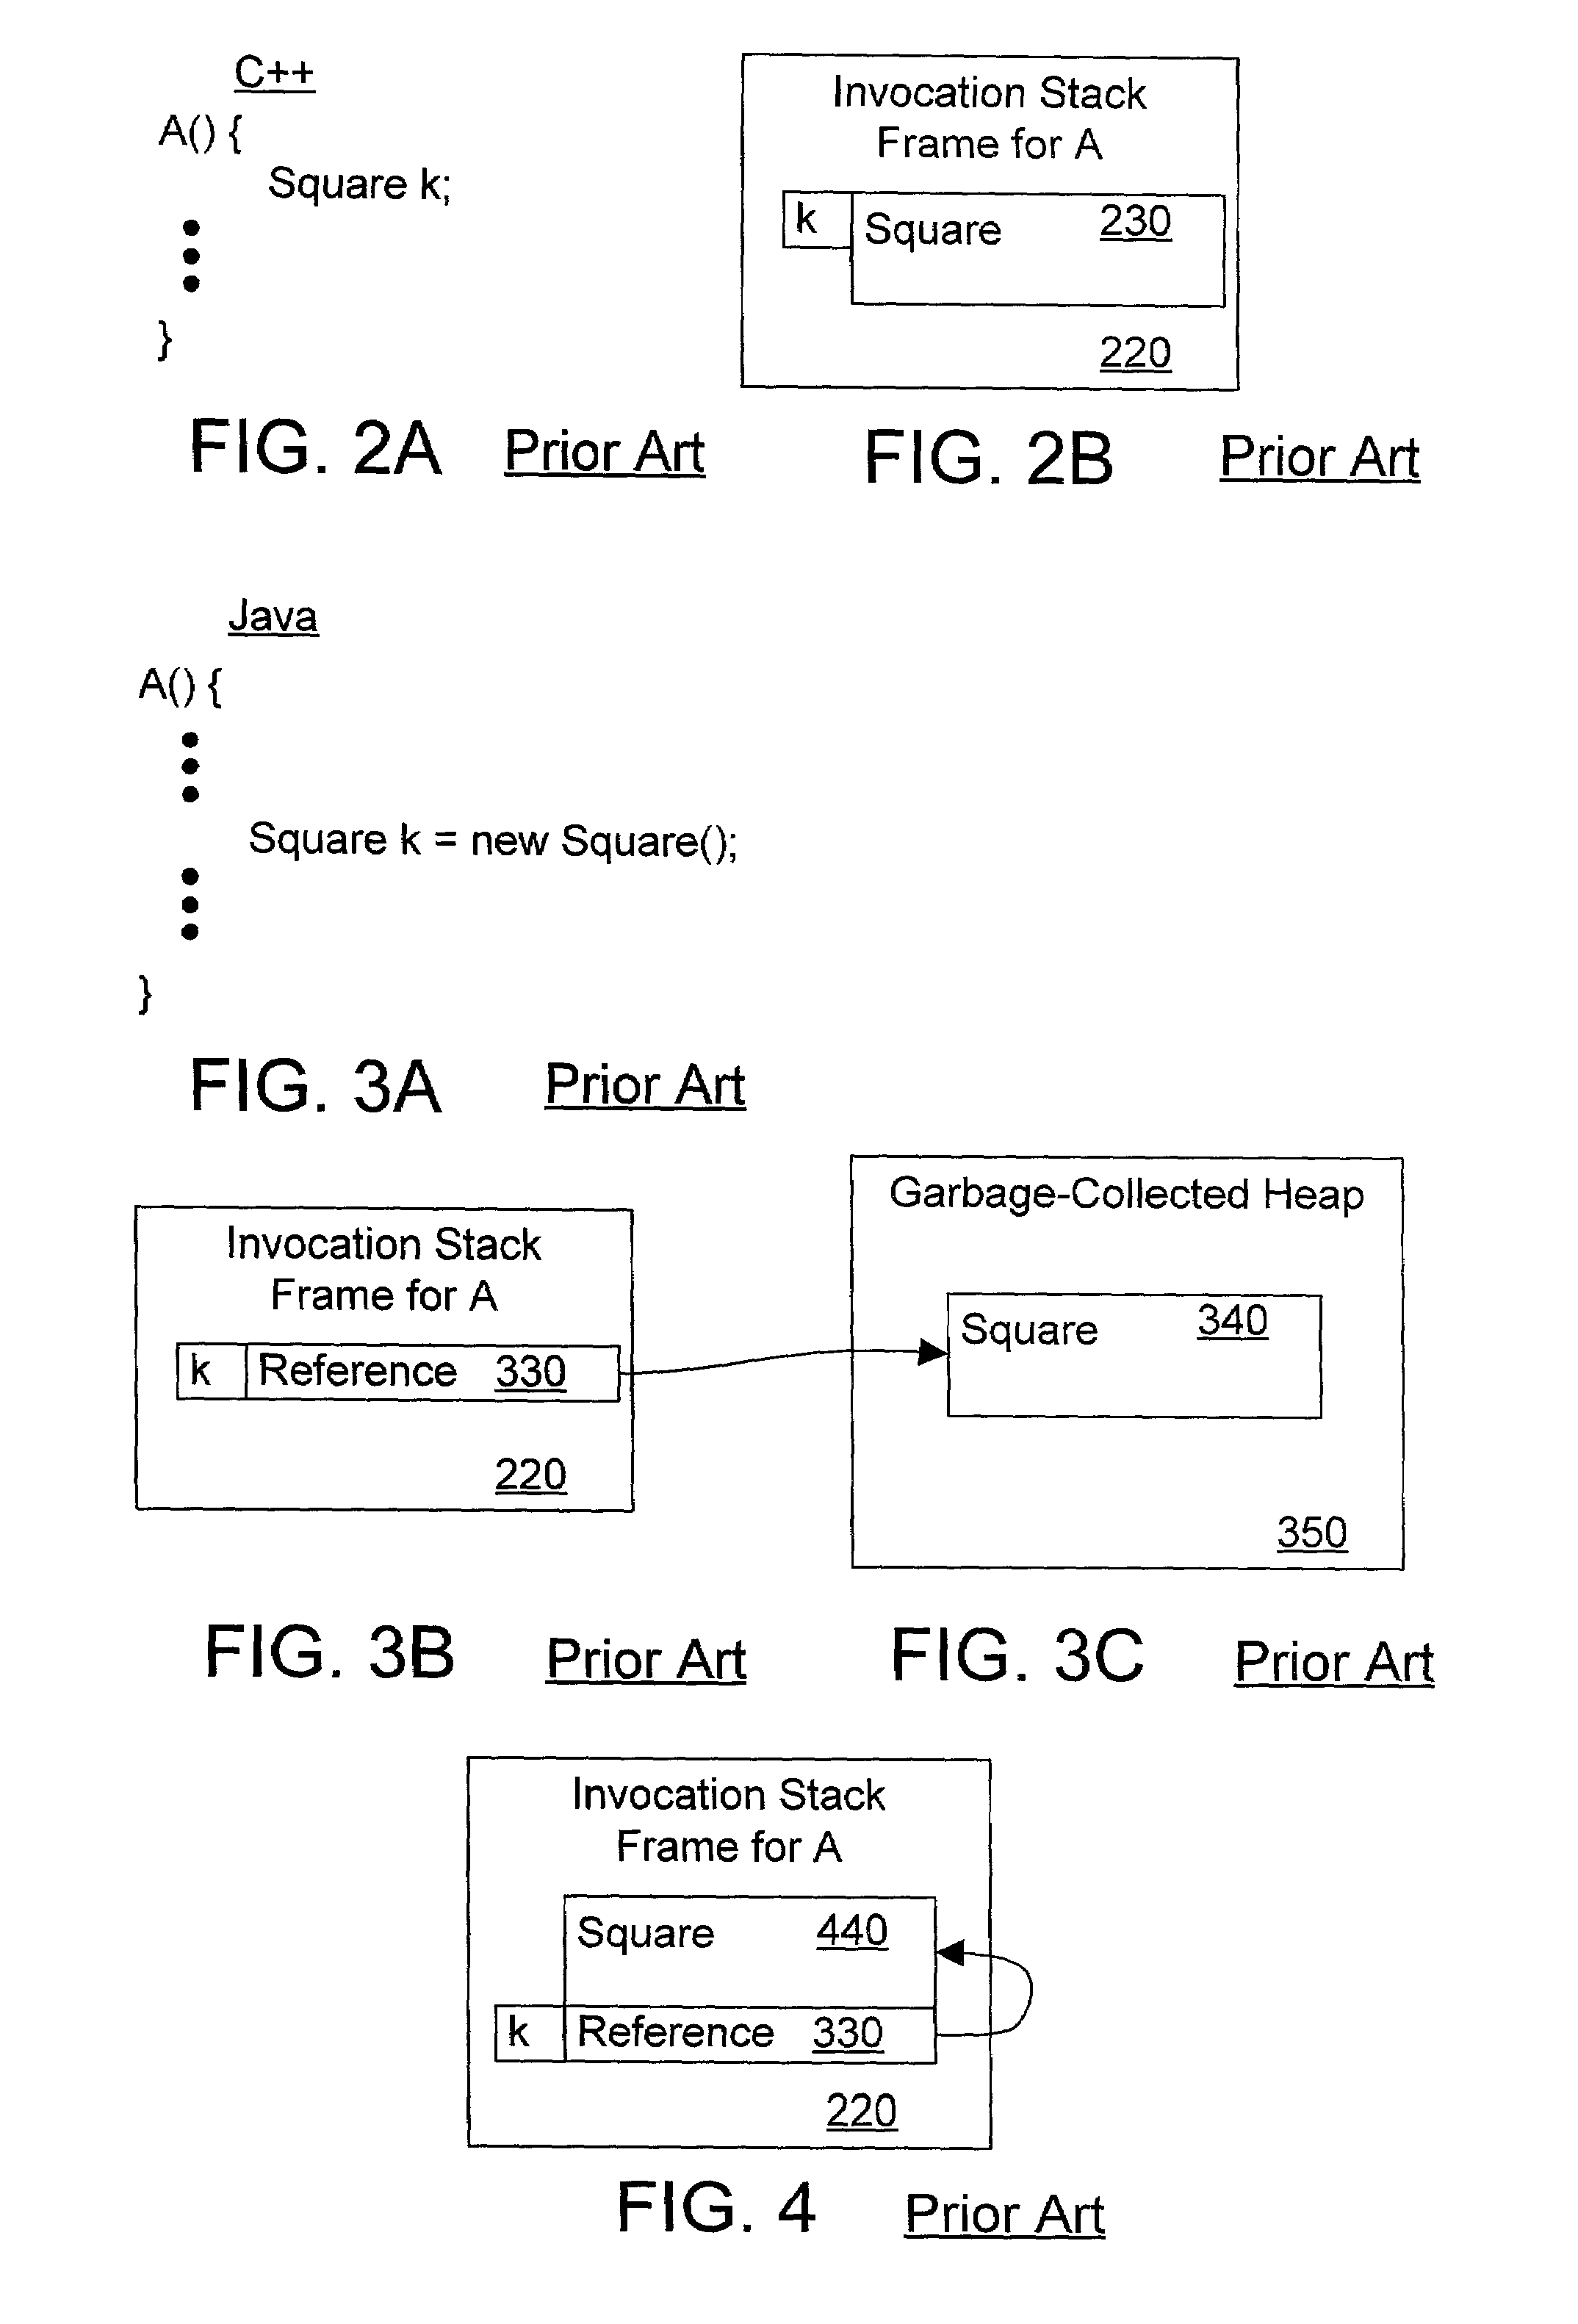 Object oriented apparatus and method for allocating objects on an invocation stack in a dynamic compilation environment